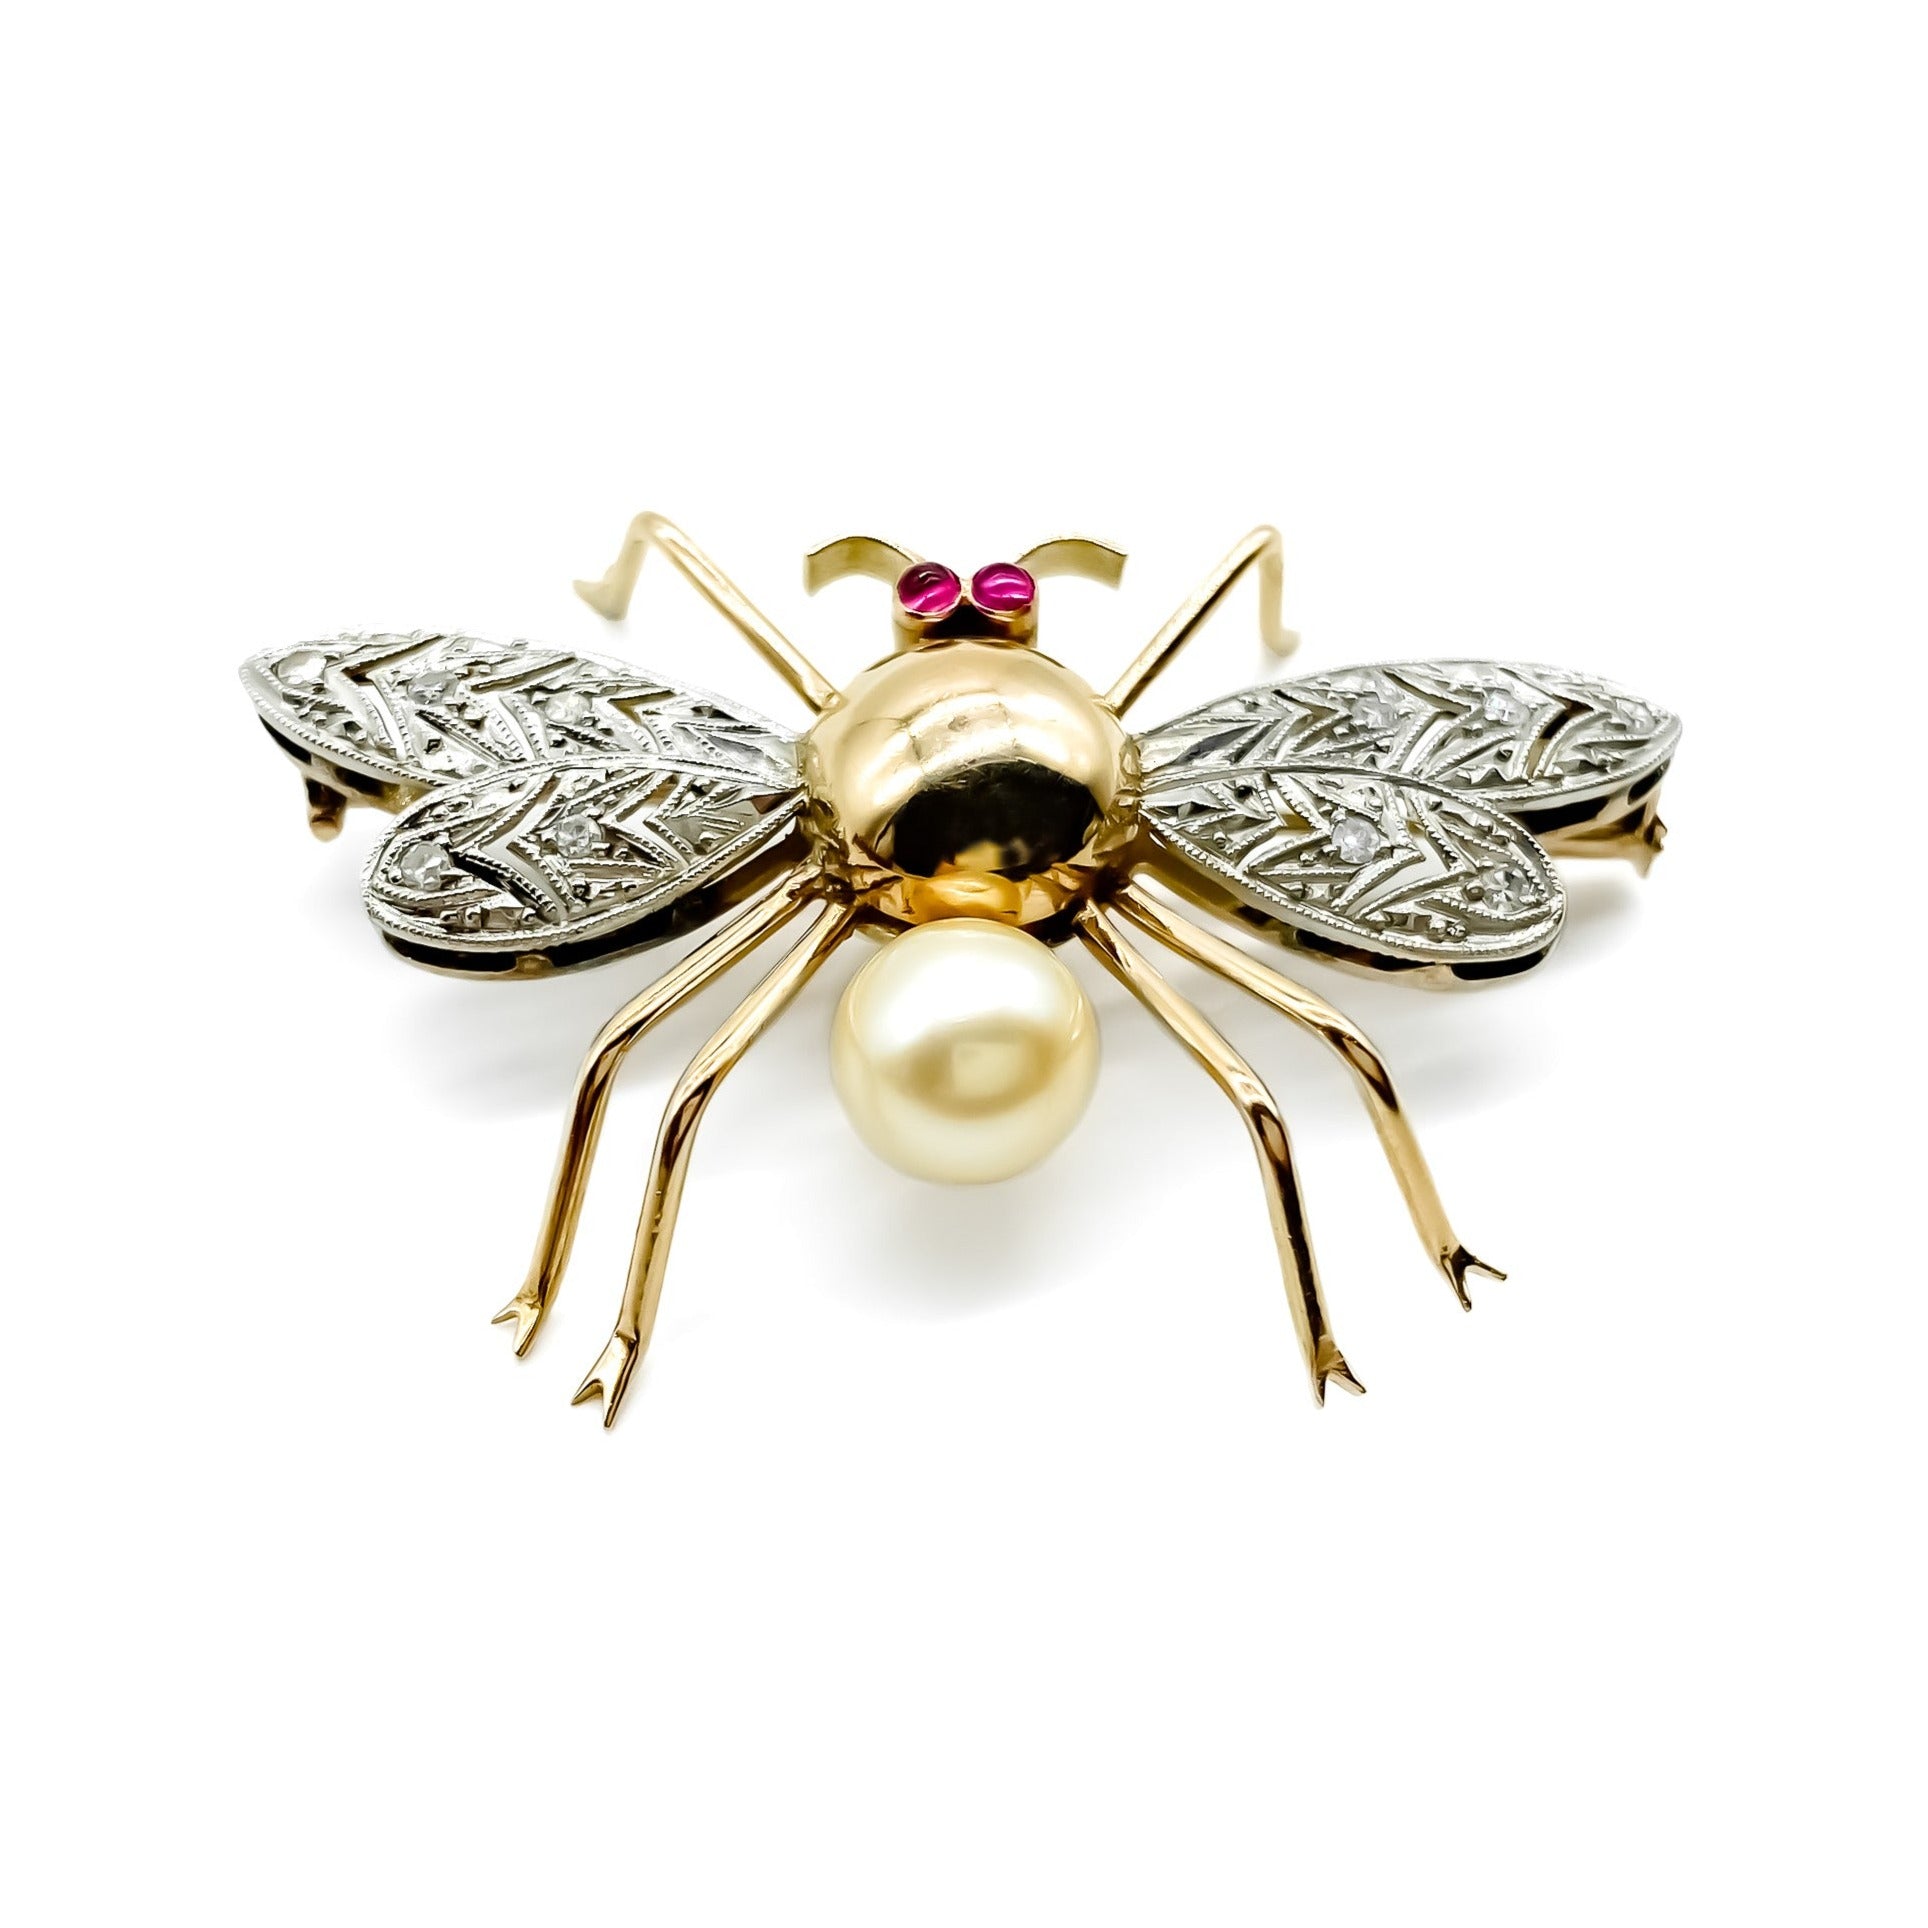 Exquisite 18ct rose gold insect brooch with diamond encrusted wings, ruby eyes and a pearl. 